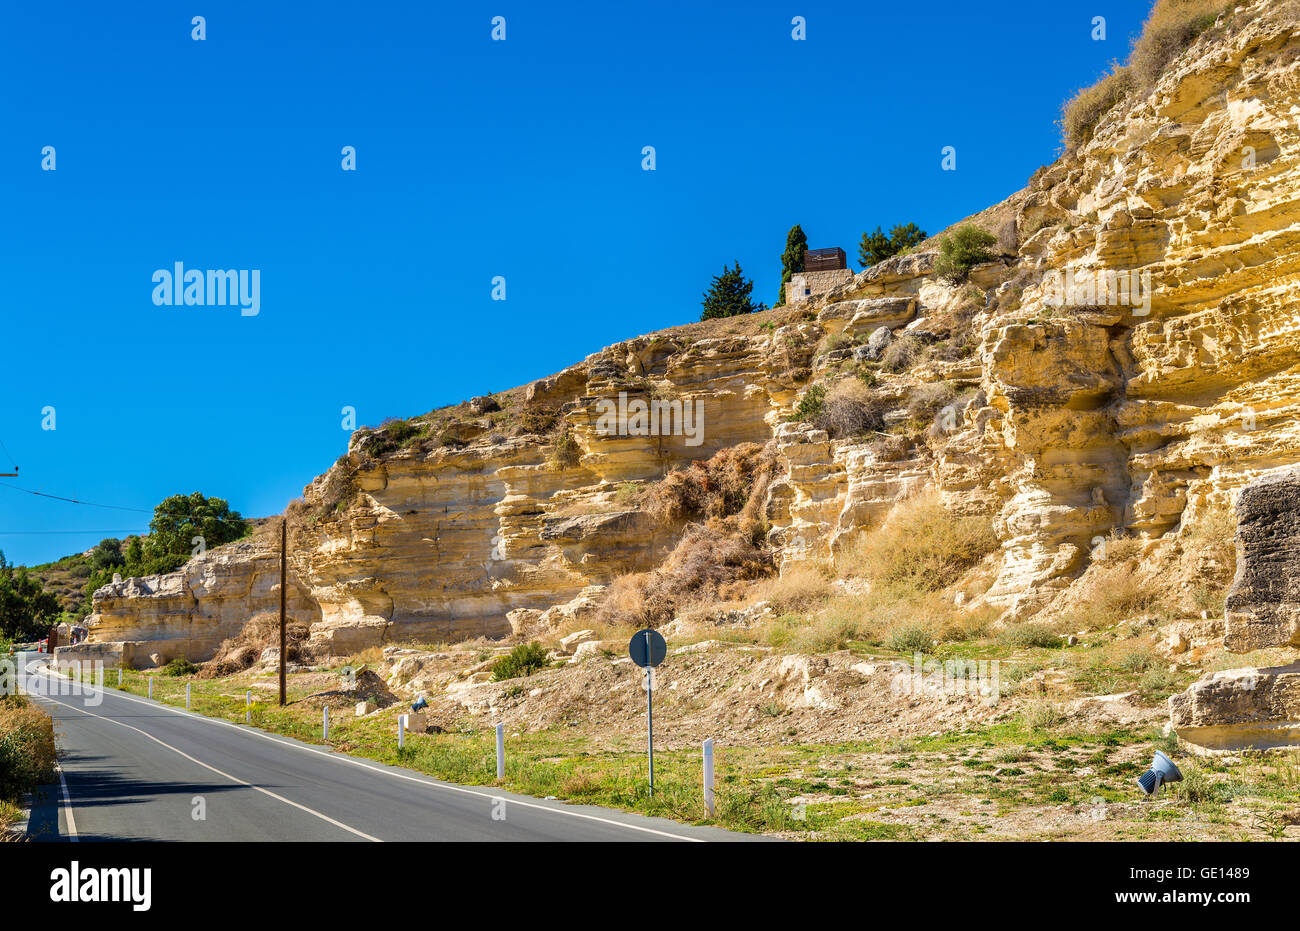 Road to the ancient city of Kourion - Cyprus Stock Photo